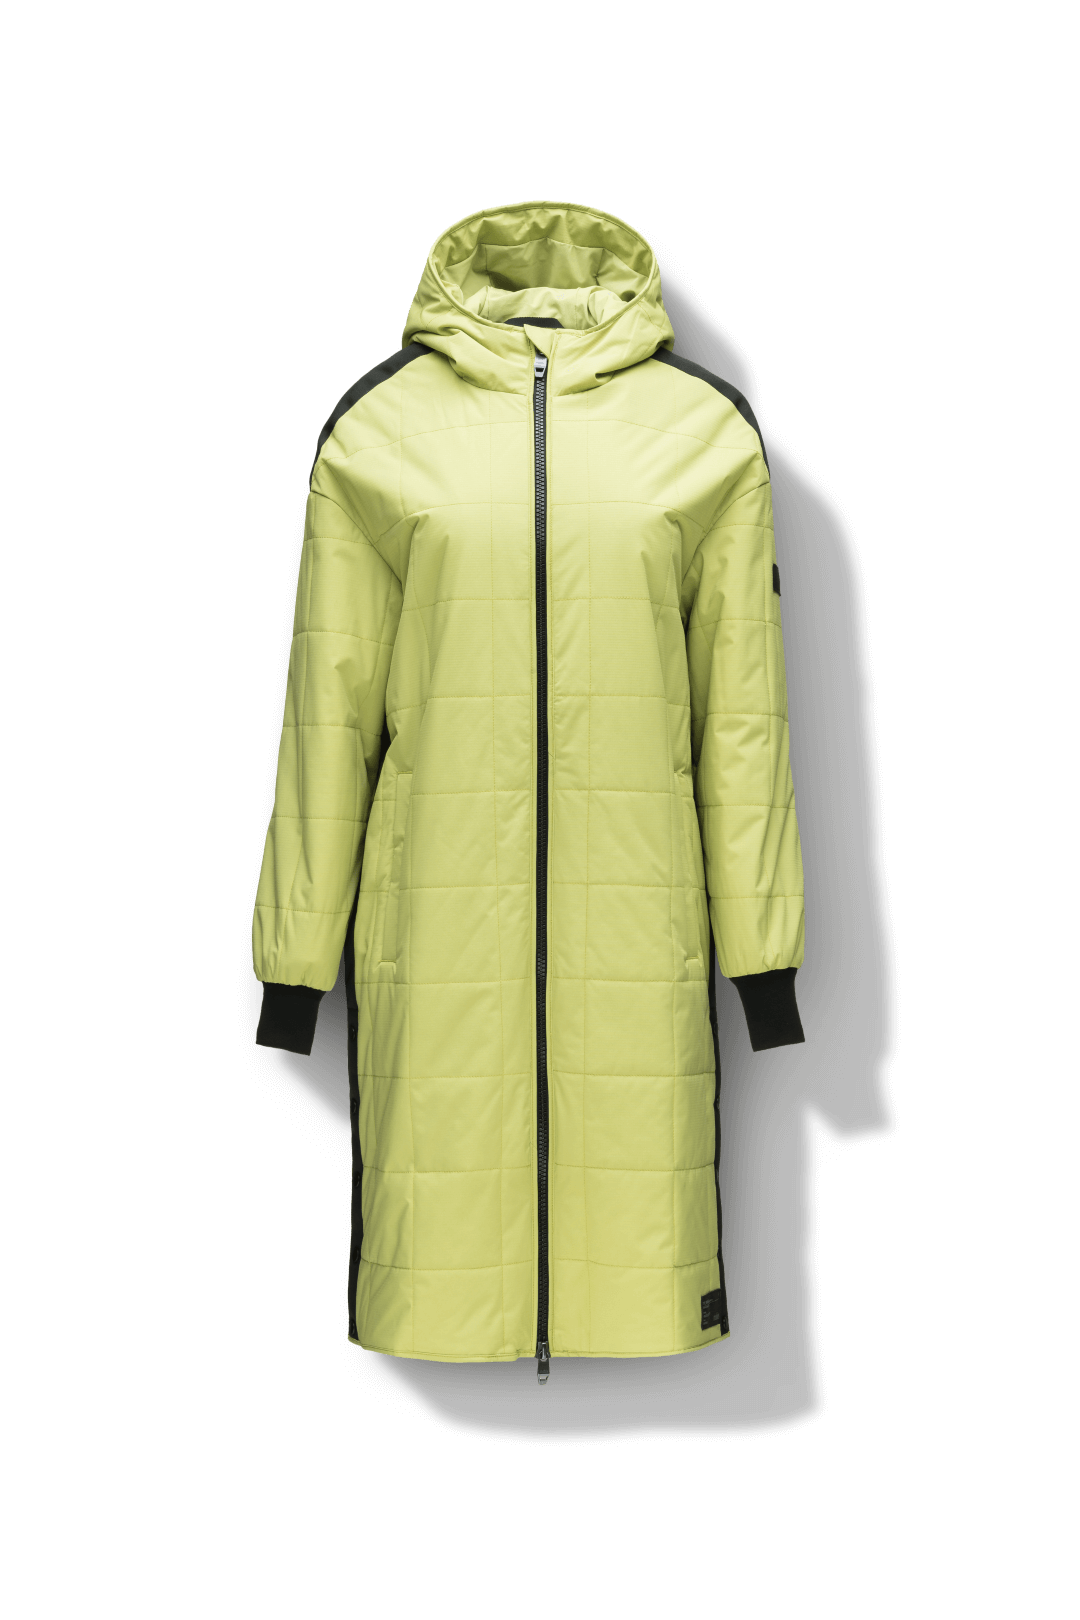 Radar Women's Performance Long Midlayer Jacket in long length, premium stretch ripstop and stretch Toray nylon fabrication, premium 4-way stretch, water resistant Primaloft Gold Insulation Active+, non-removable hood with adjustable draw cord, 2-way branded zipper at centre front, single welt pockets with magnetic closure at hips, elongated ribbed cuffs, grosgrain ribbon detail at shoulder and side seams, and snap closure side seam vent, in Dark Citron